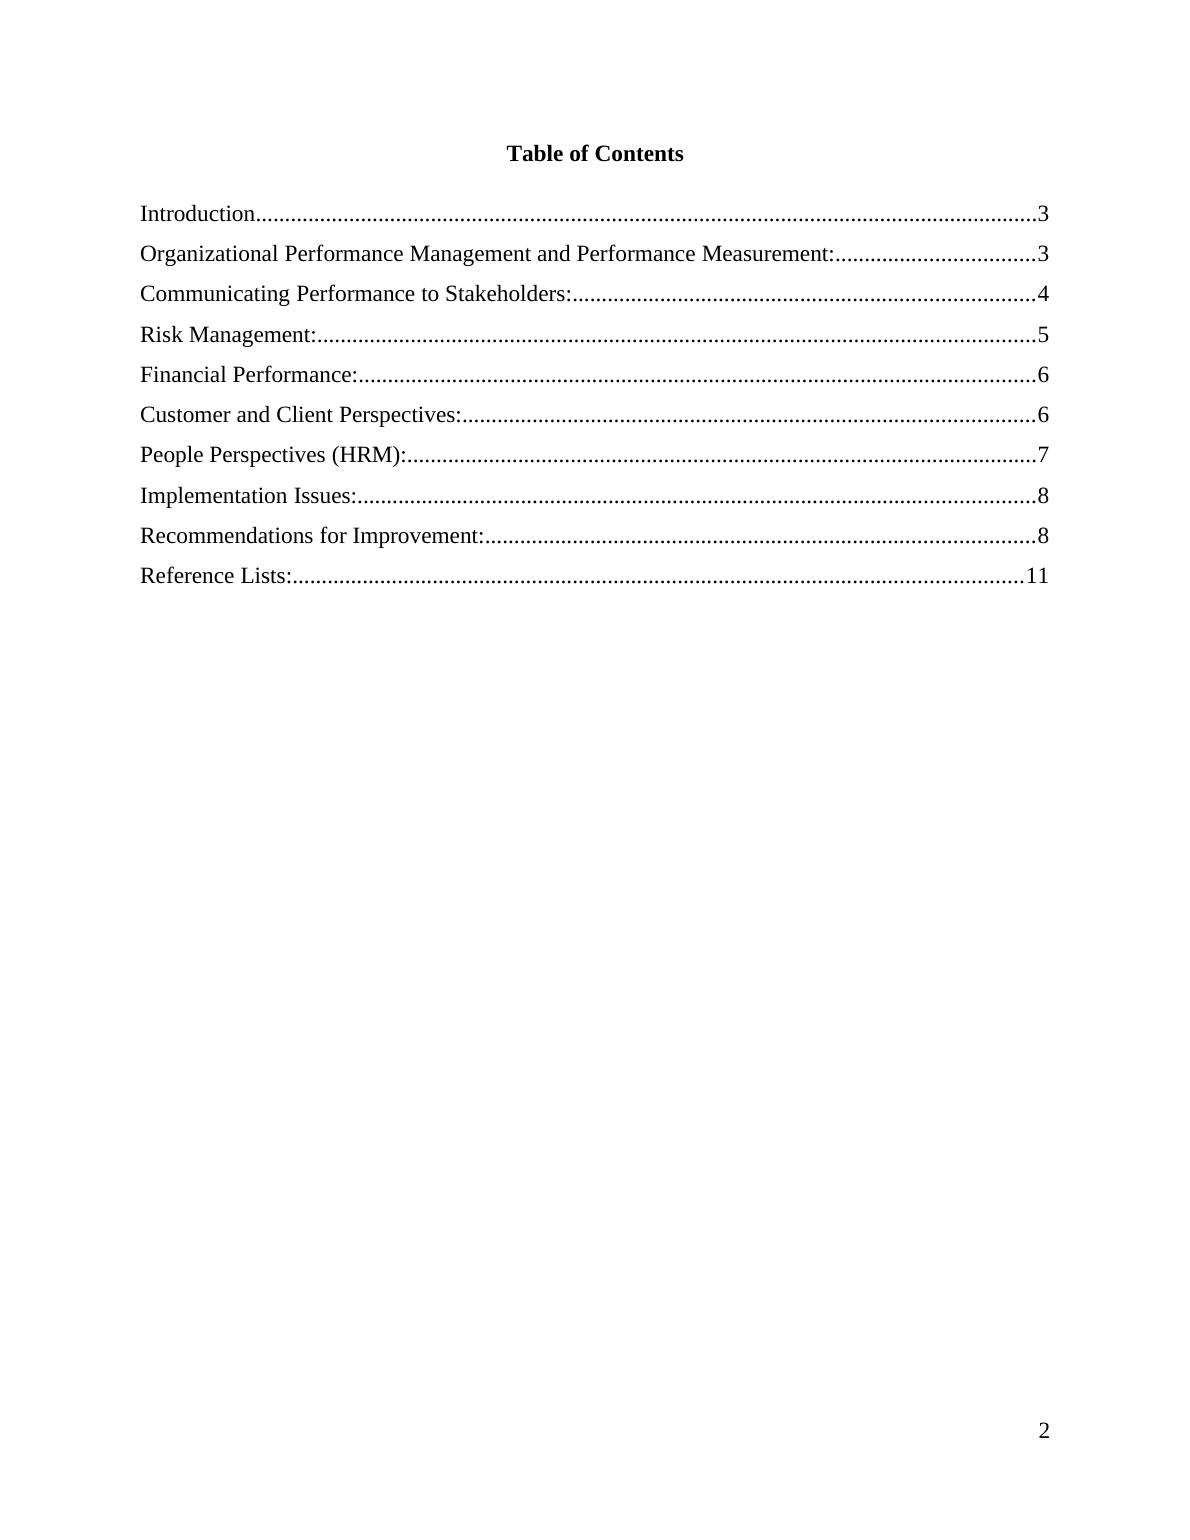 Organizational Performance Management (OPM) in Coca Cola Company : Assignment_2